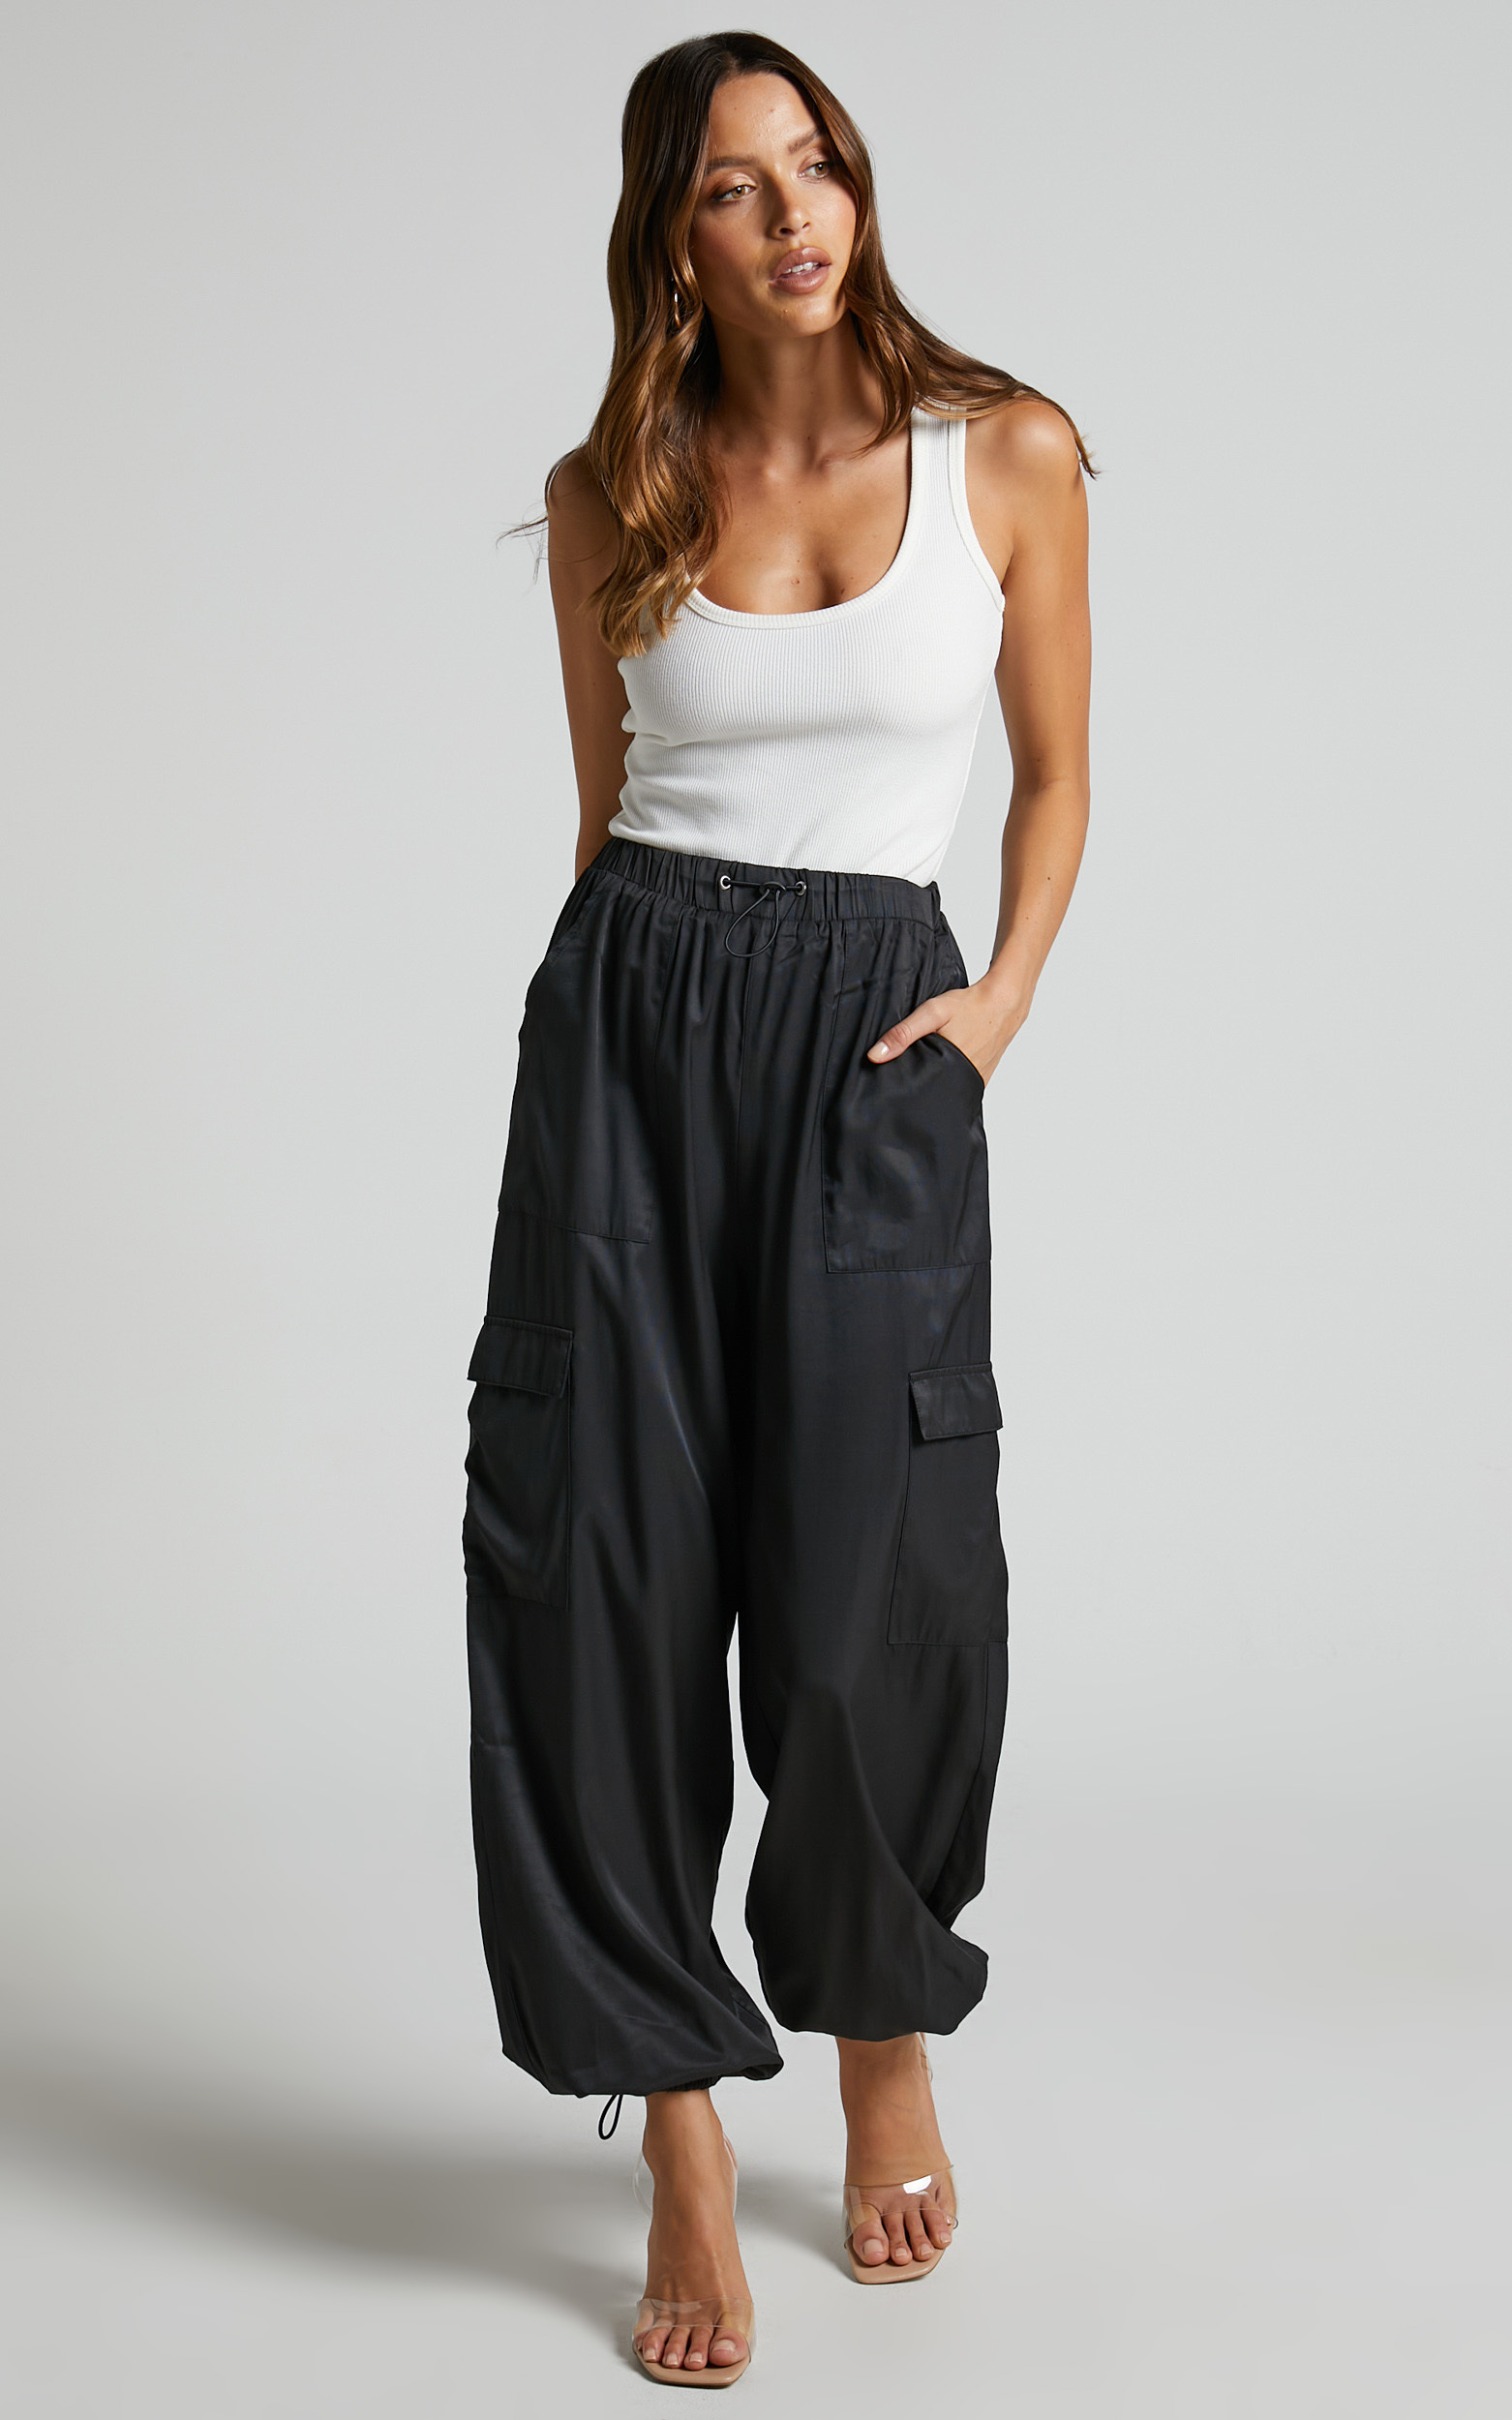 Hanabi - High Waisted Cargo Parachute Pant in Black - 06, BLK1, hi-res image number null